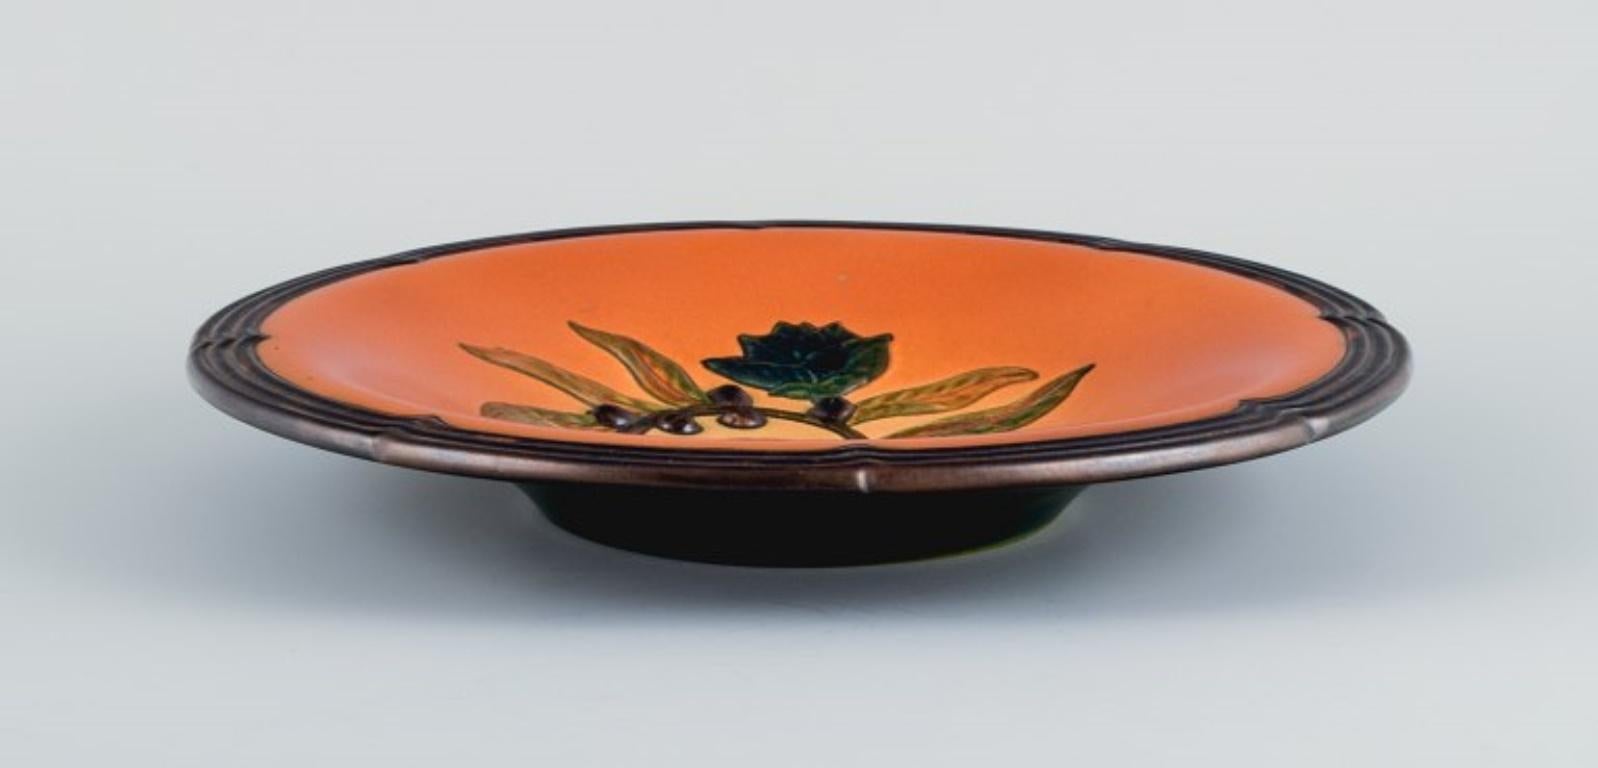 Ipsens, Denmark, ceramic bowl with floral motif.
Glaze in orange-green shades.
1920s.
In excellent condition.
Model number 111.
Dimensions: D 27.5 x H 4.5 cm.